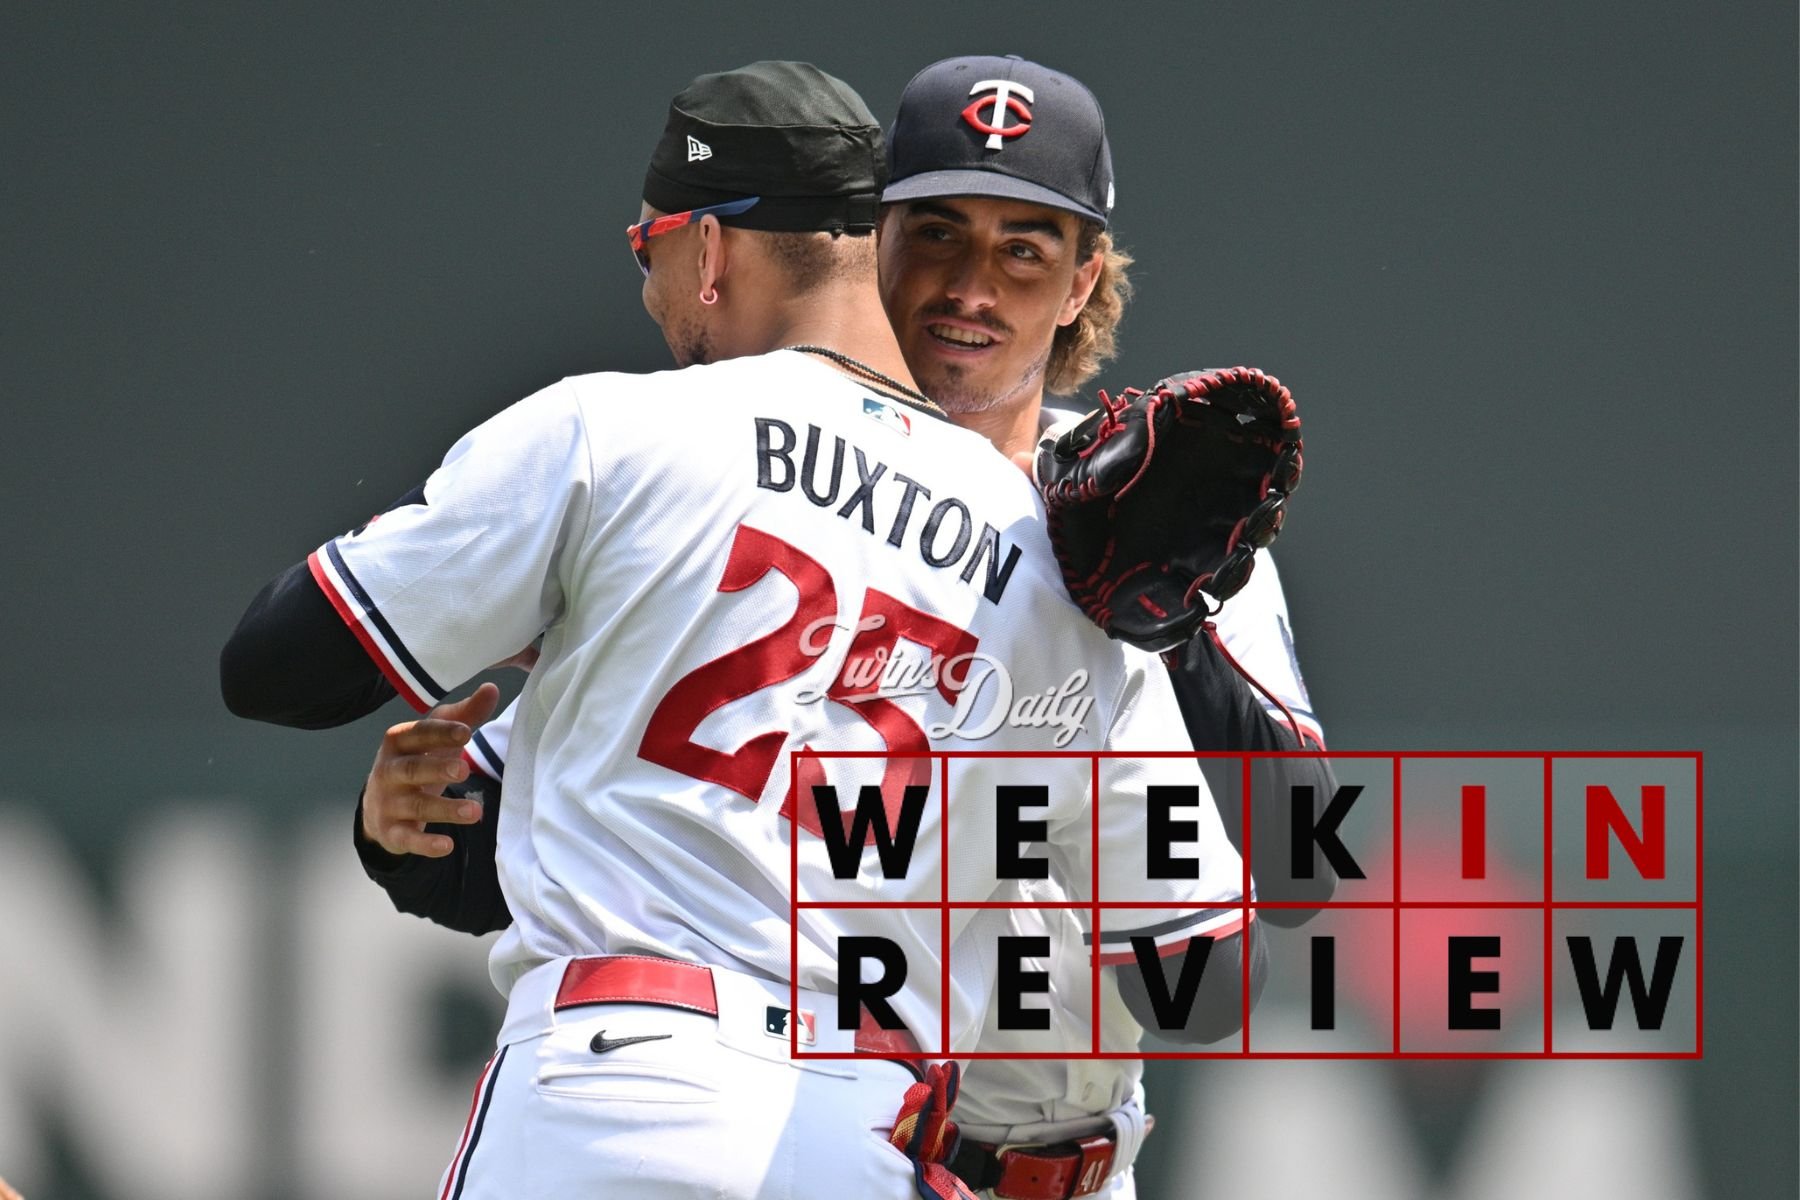 Week in Review: Road (Trip) to Redemption? - Twins - Twins Daily